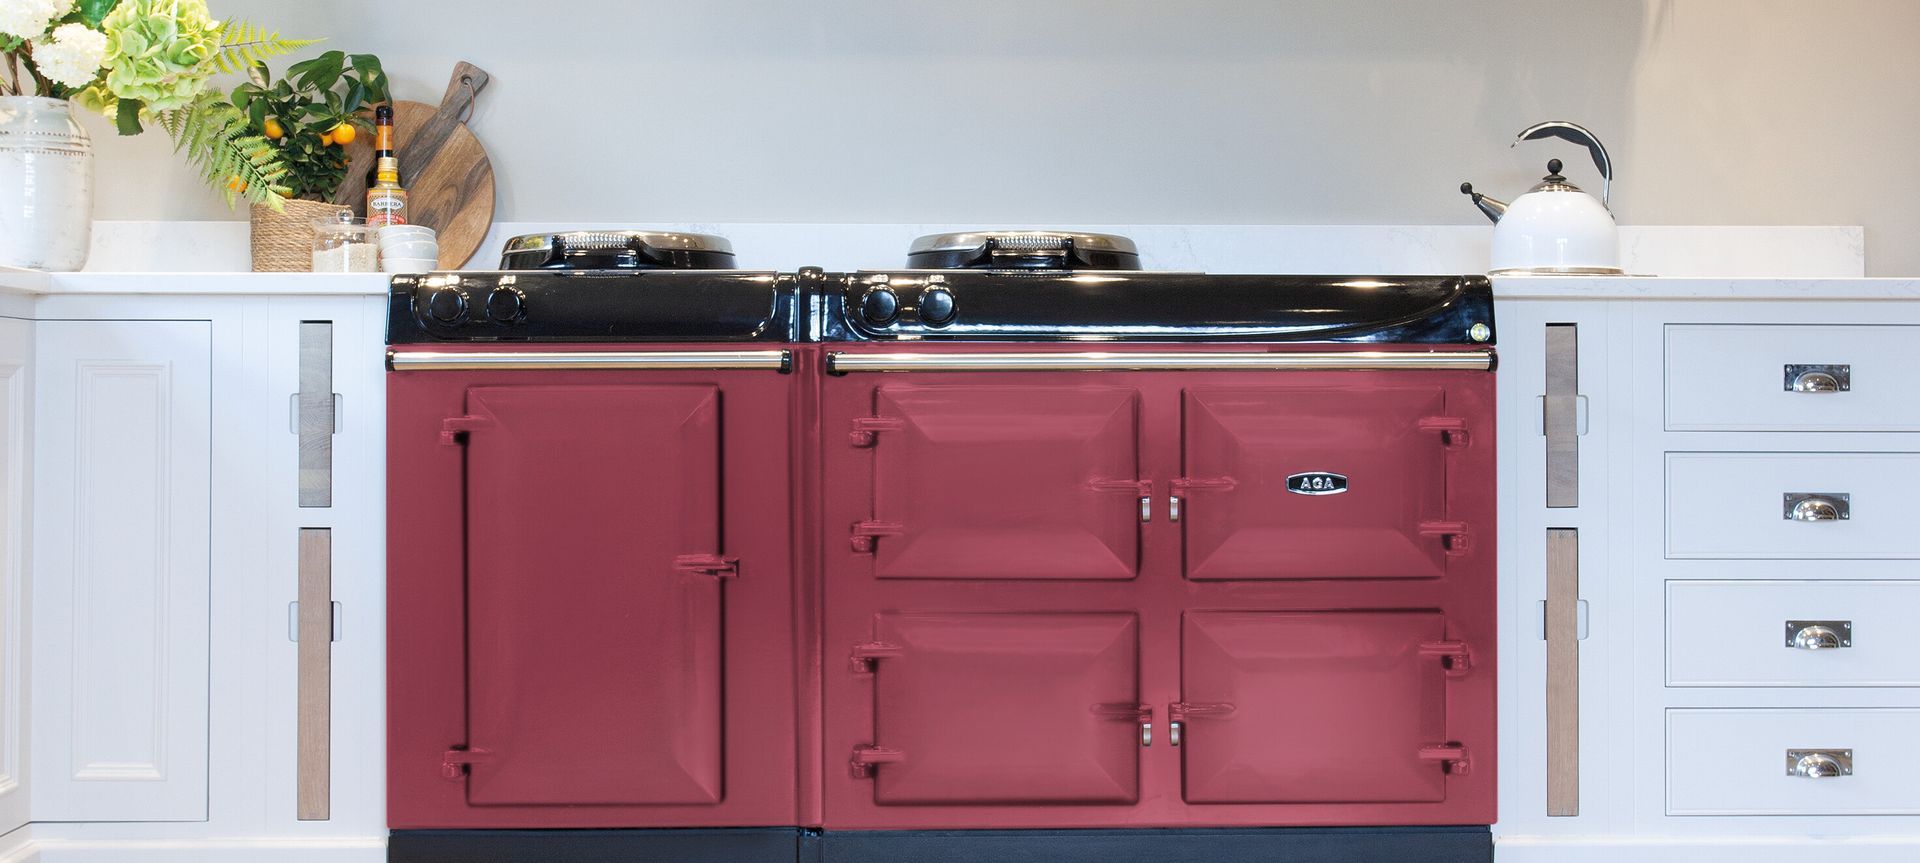 The AGA ER3 series 160 electric cooker.